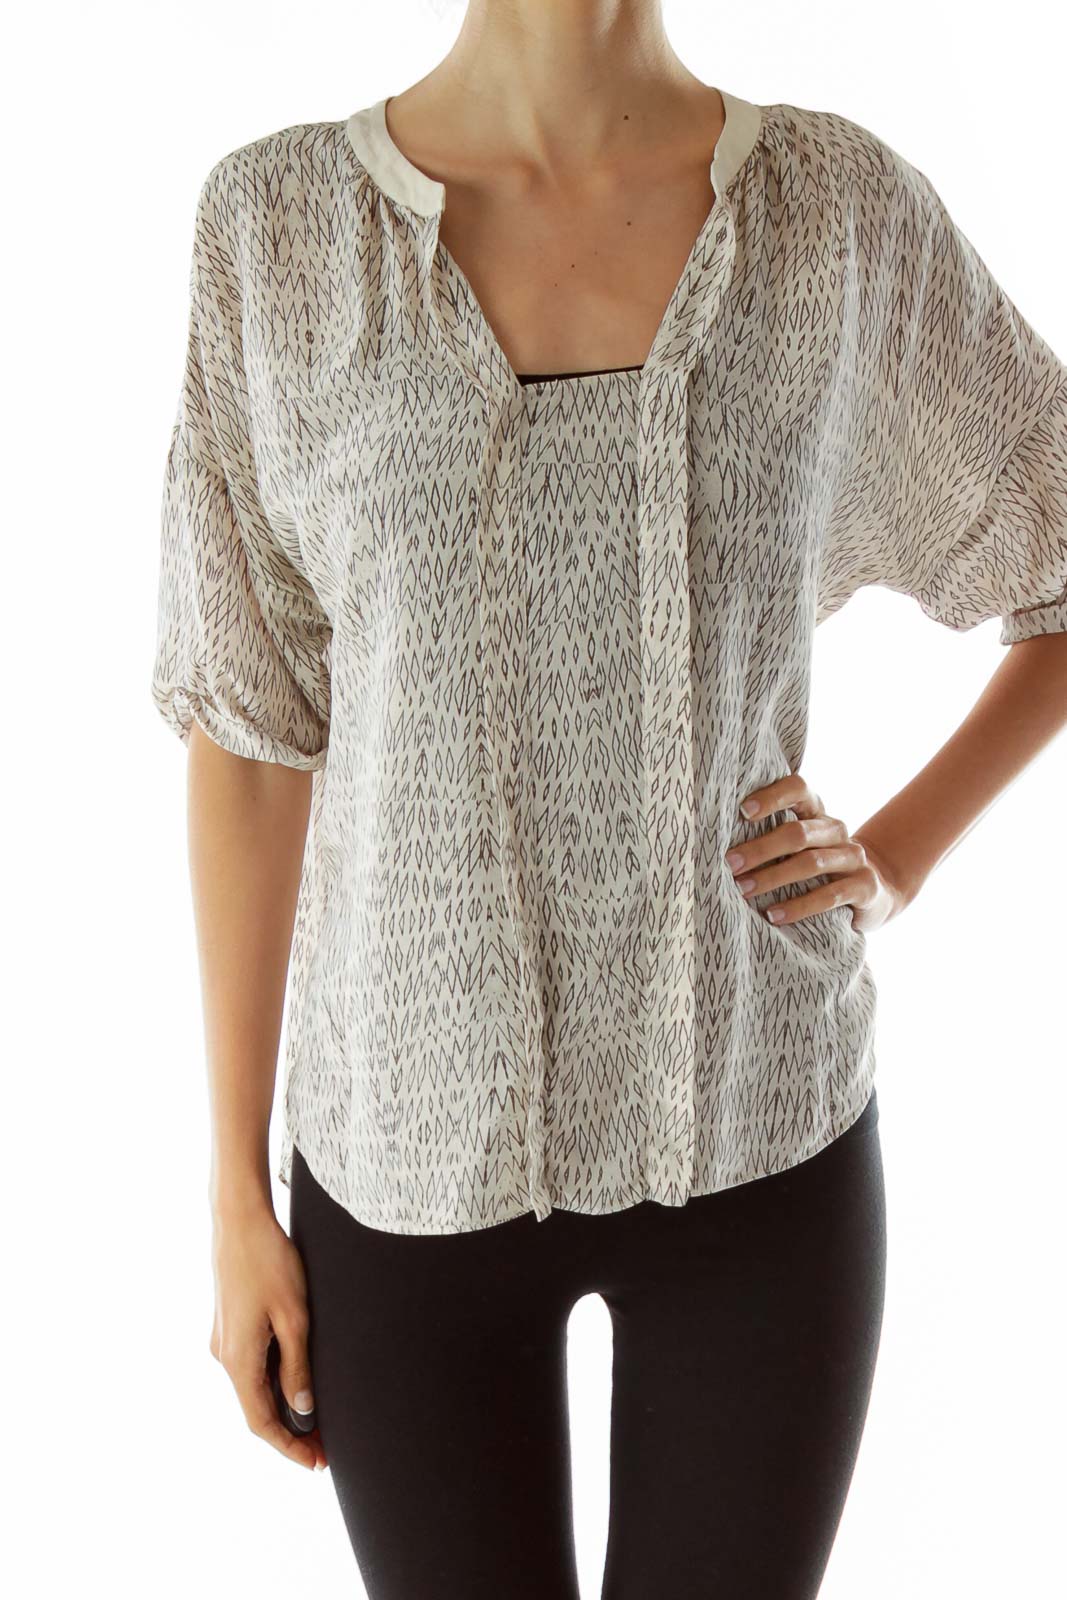 Beige Tribal Printed Blouse Front